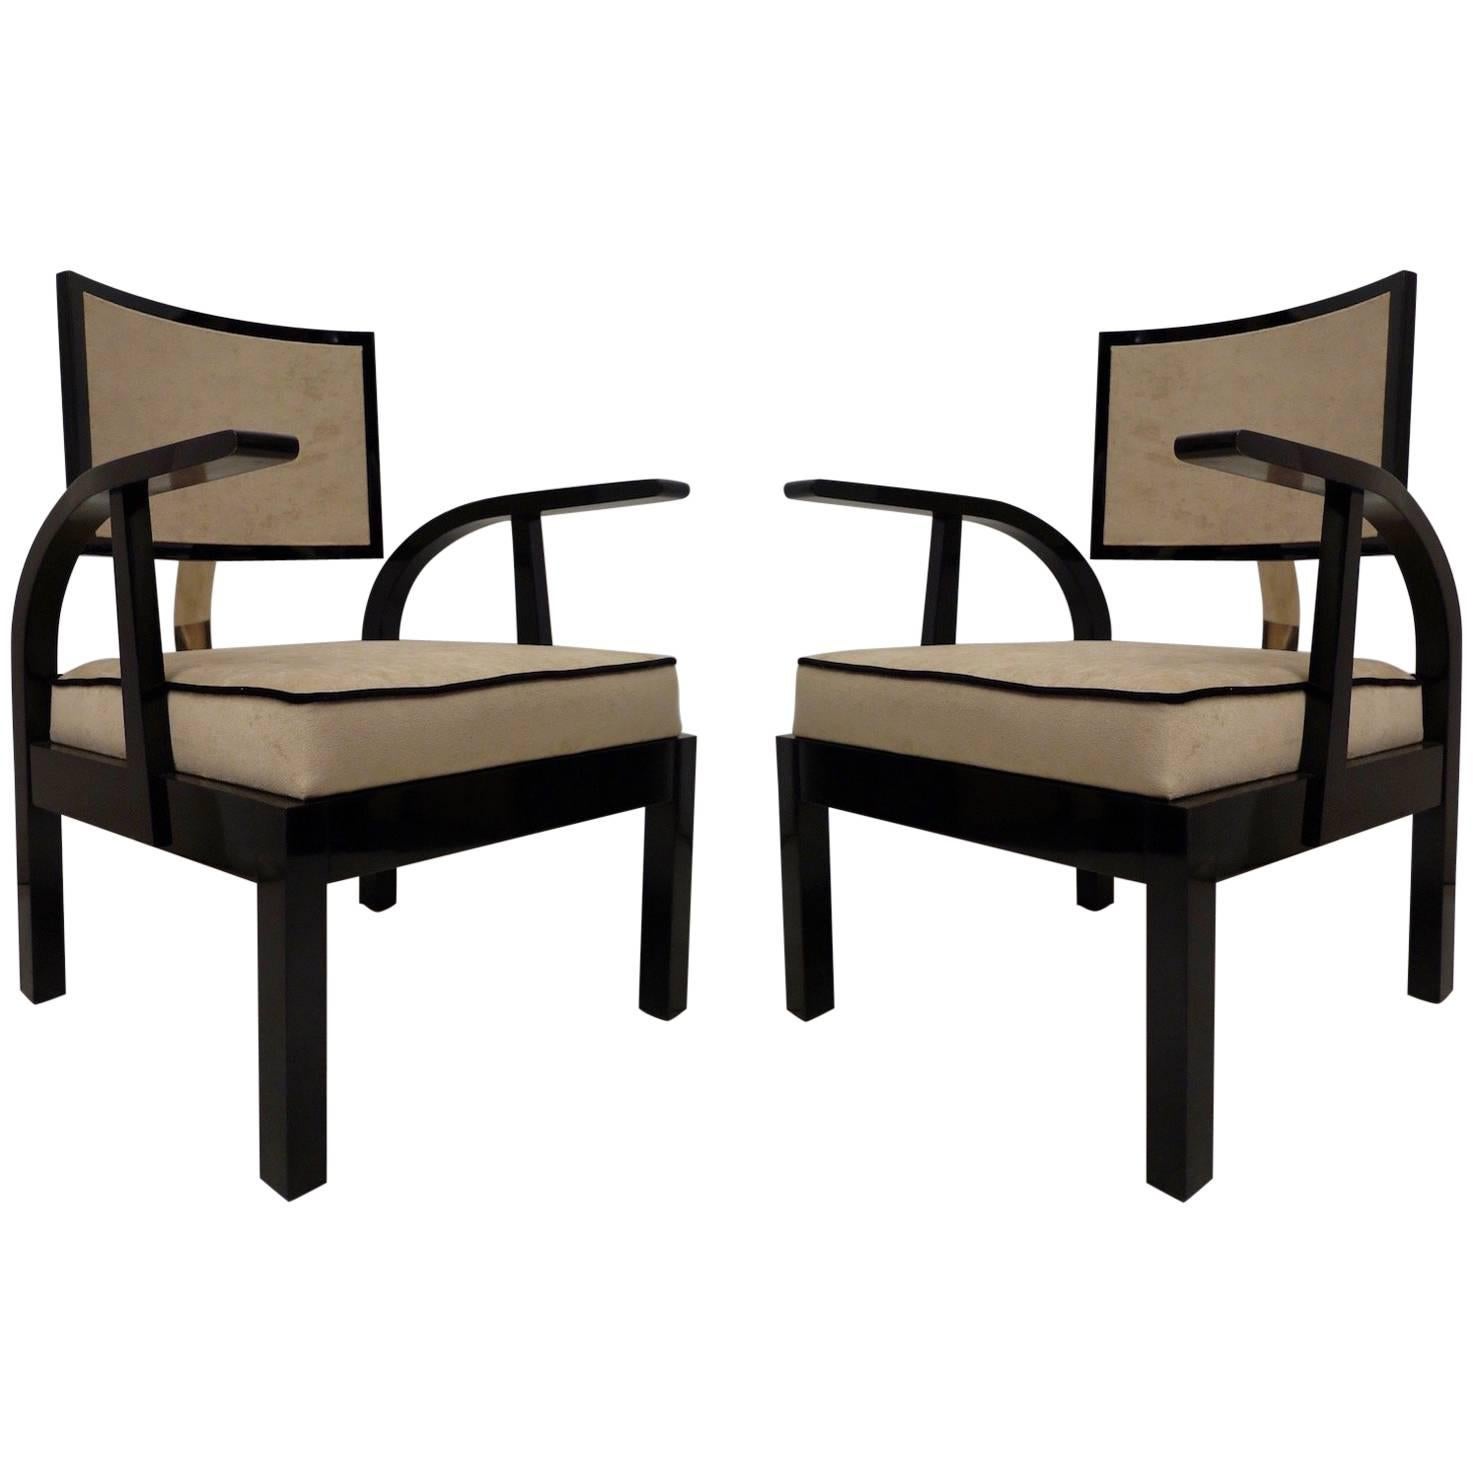 Two Armchairs by Lajos Kozma, Ungheria, 1940s